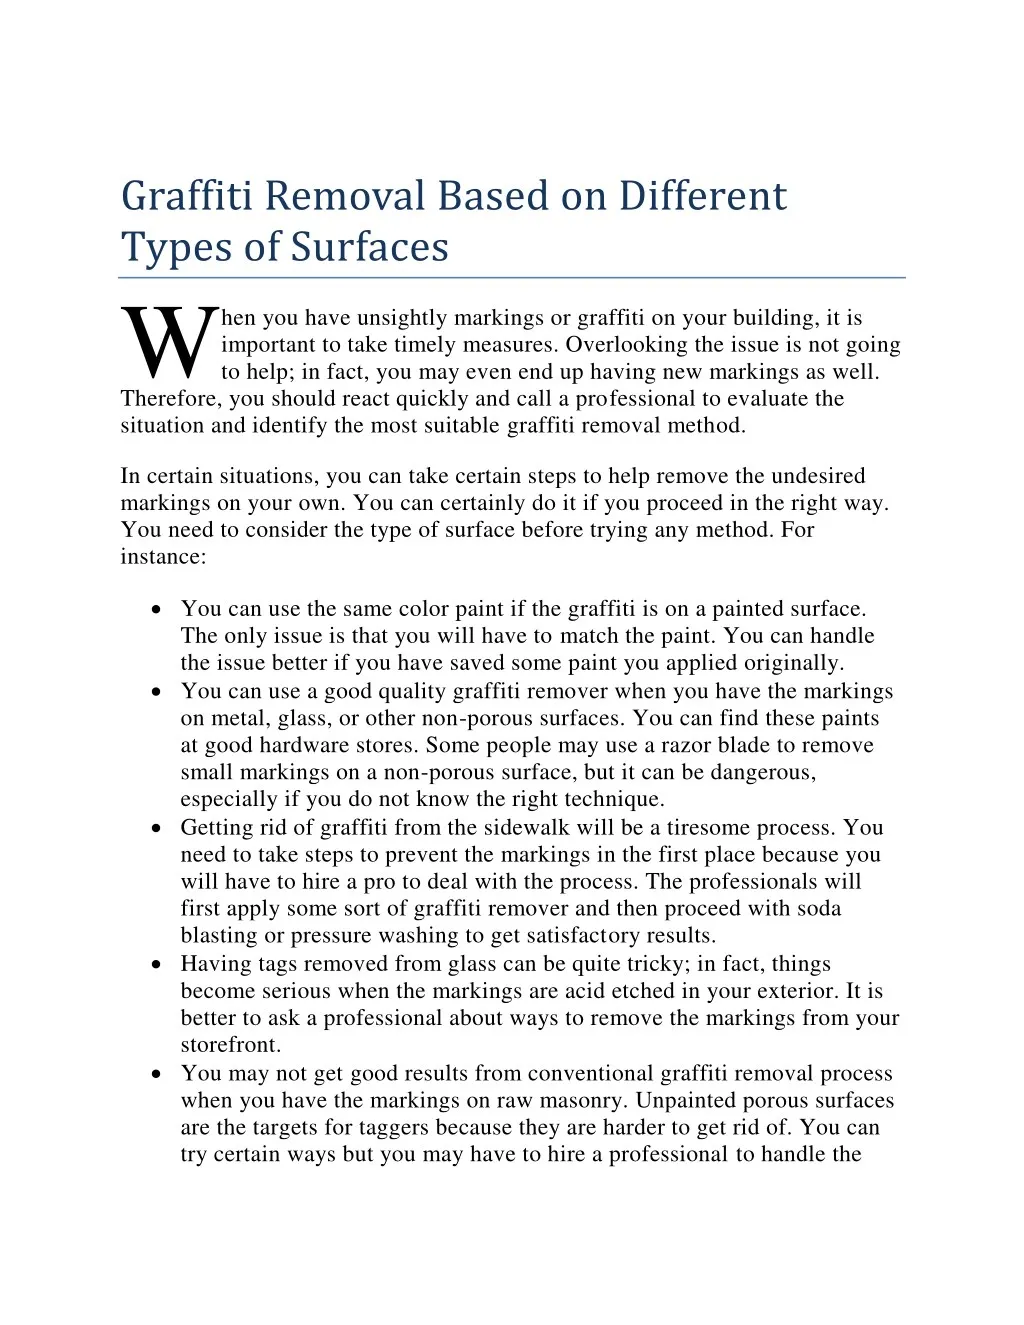 graffiti removal based on different types